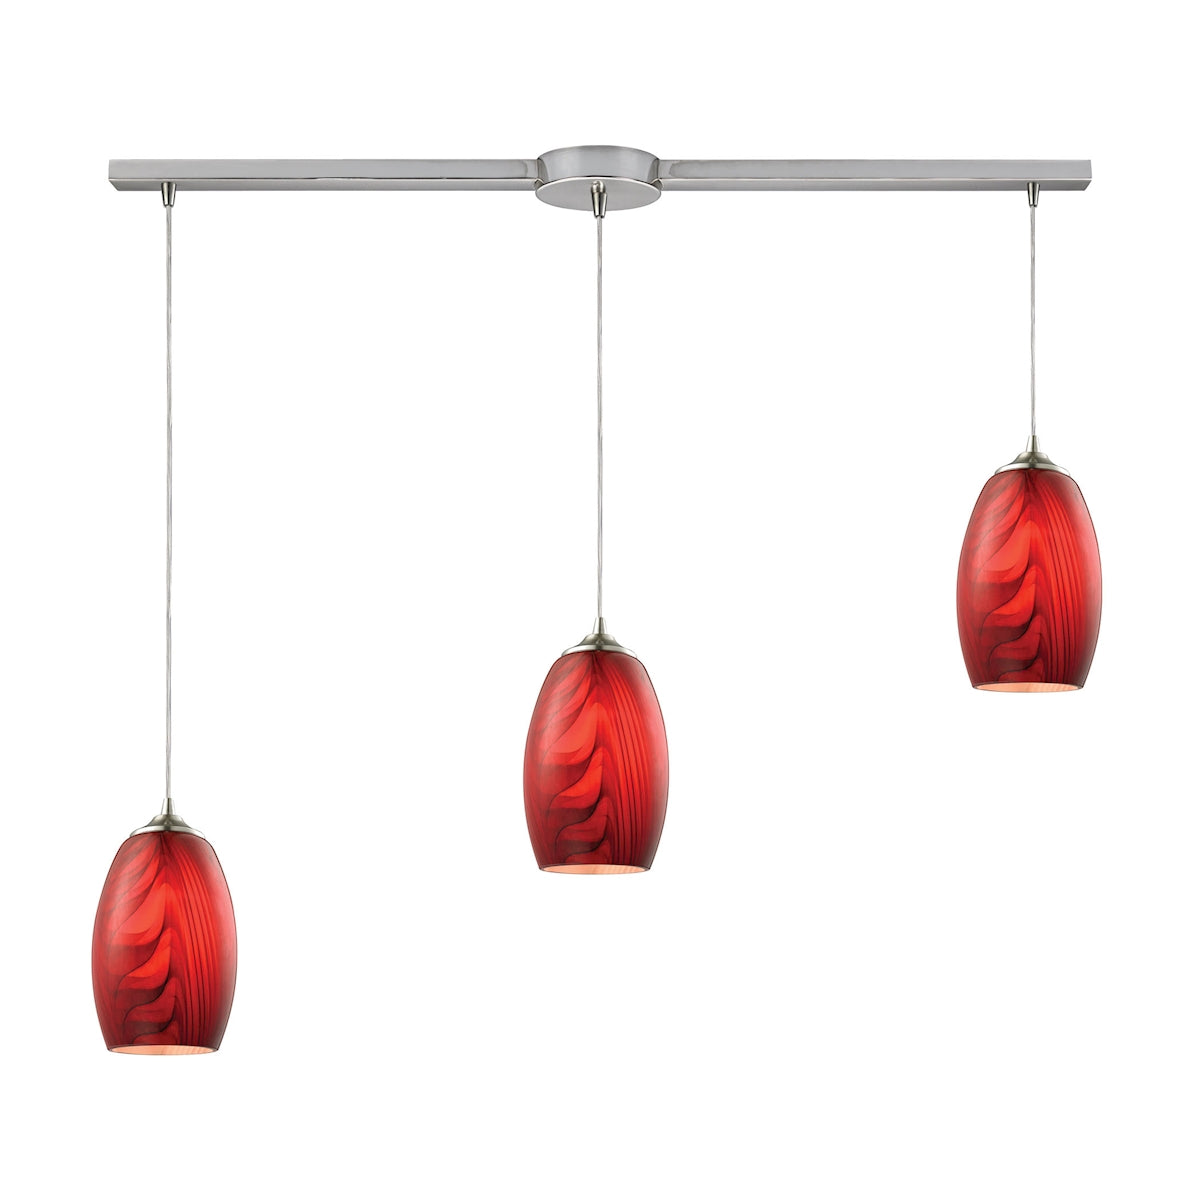 ELK Lighting 31610/3L Tidewaters 3-Light Linear Pendant Fixture in Satin Nickel with Ruby Glass